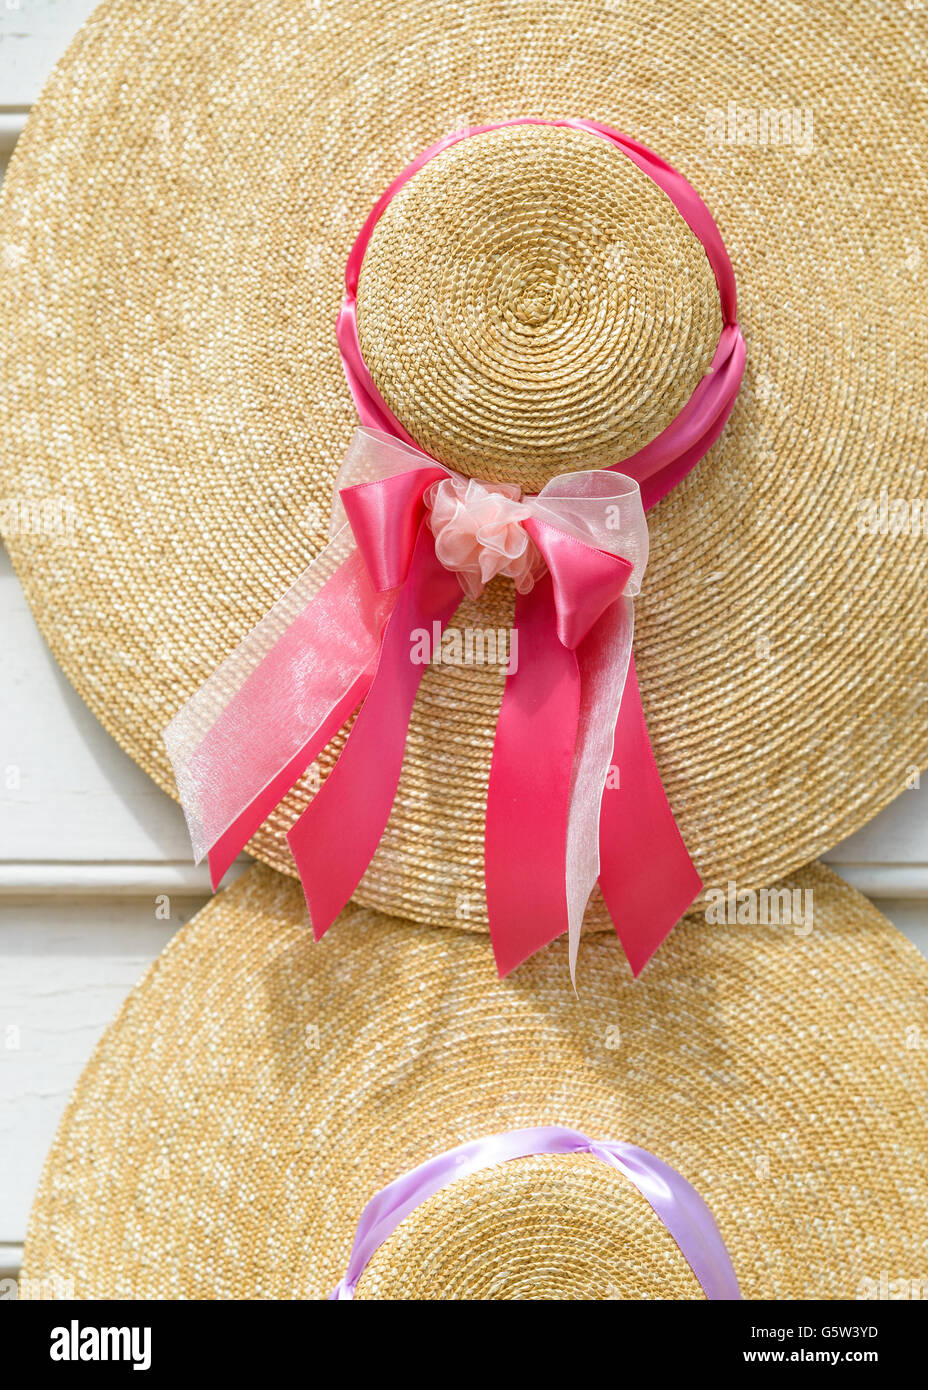 Traditional straw hats with ribbons Stock Photo